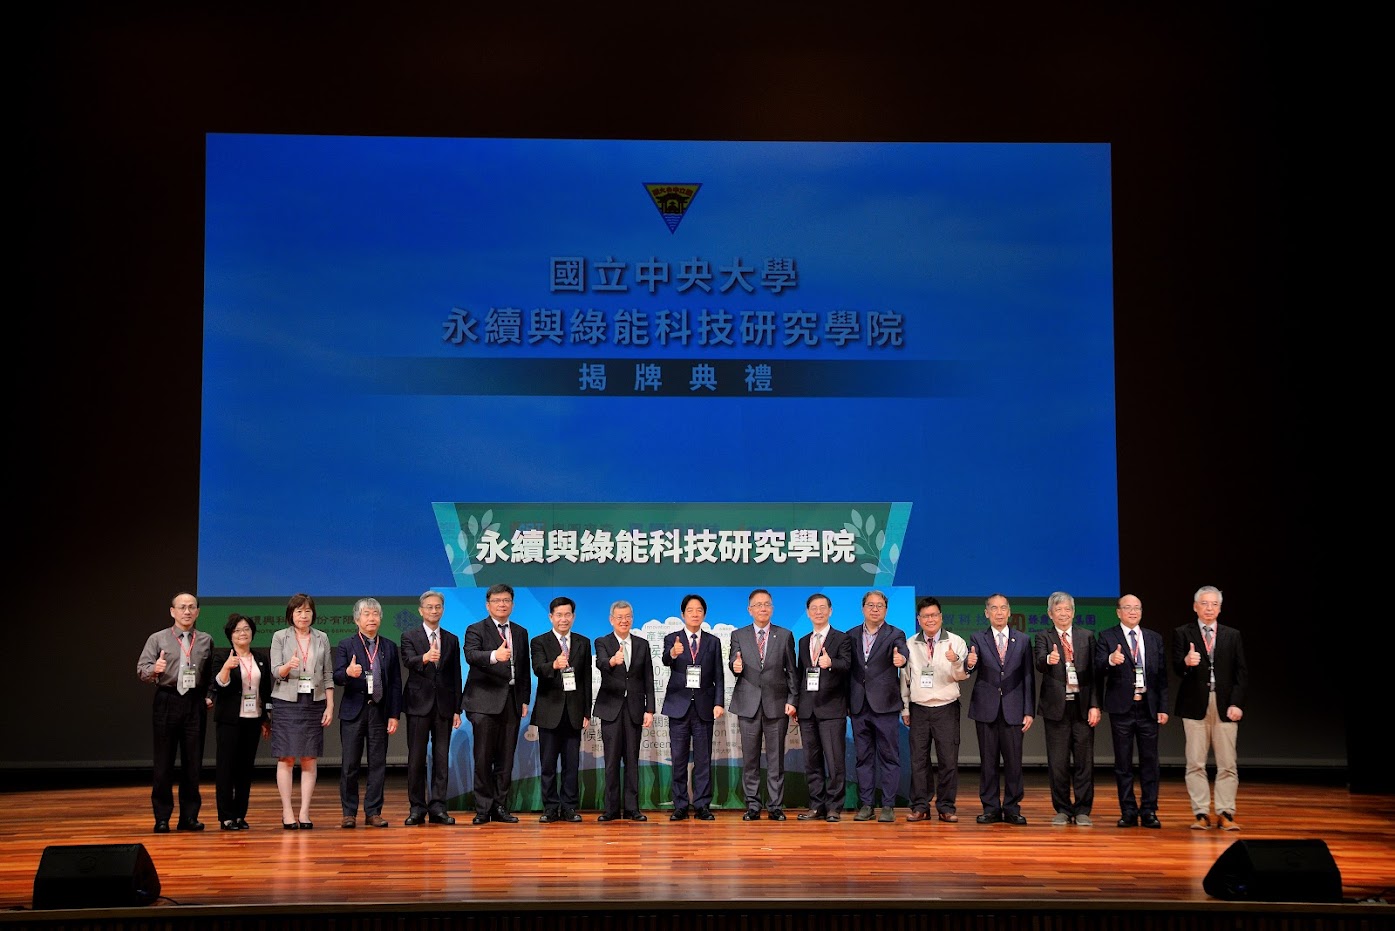 Unveiling Ceremony Held for NCU's Graduate College of Sustainability and Green Energy (SAGE)—First of Its Kind in Taiwan